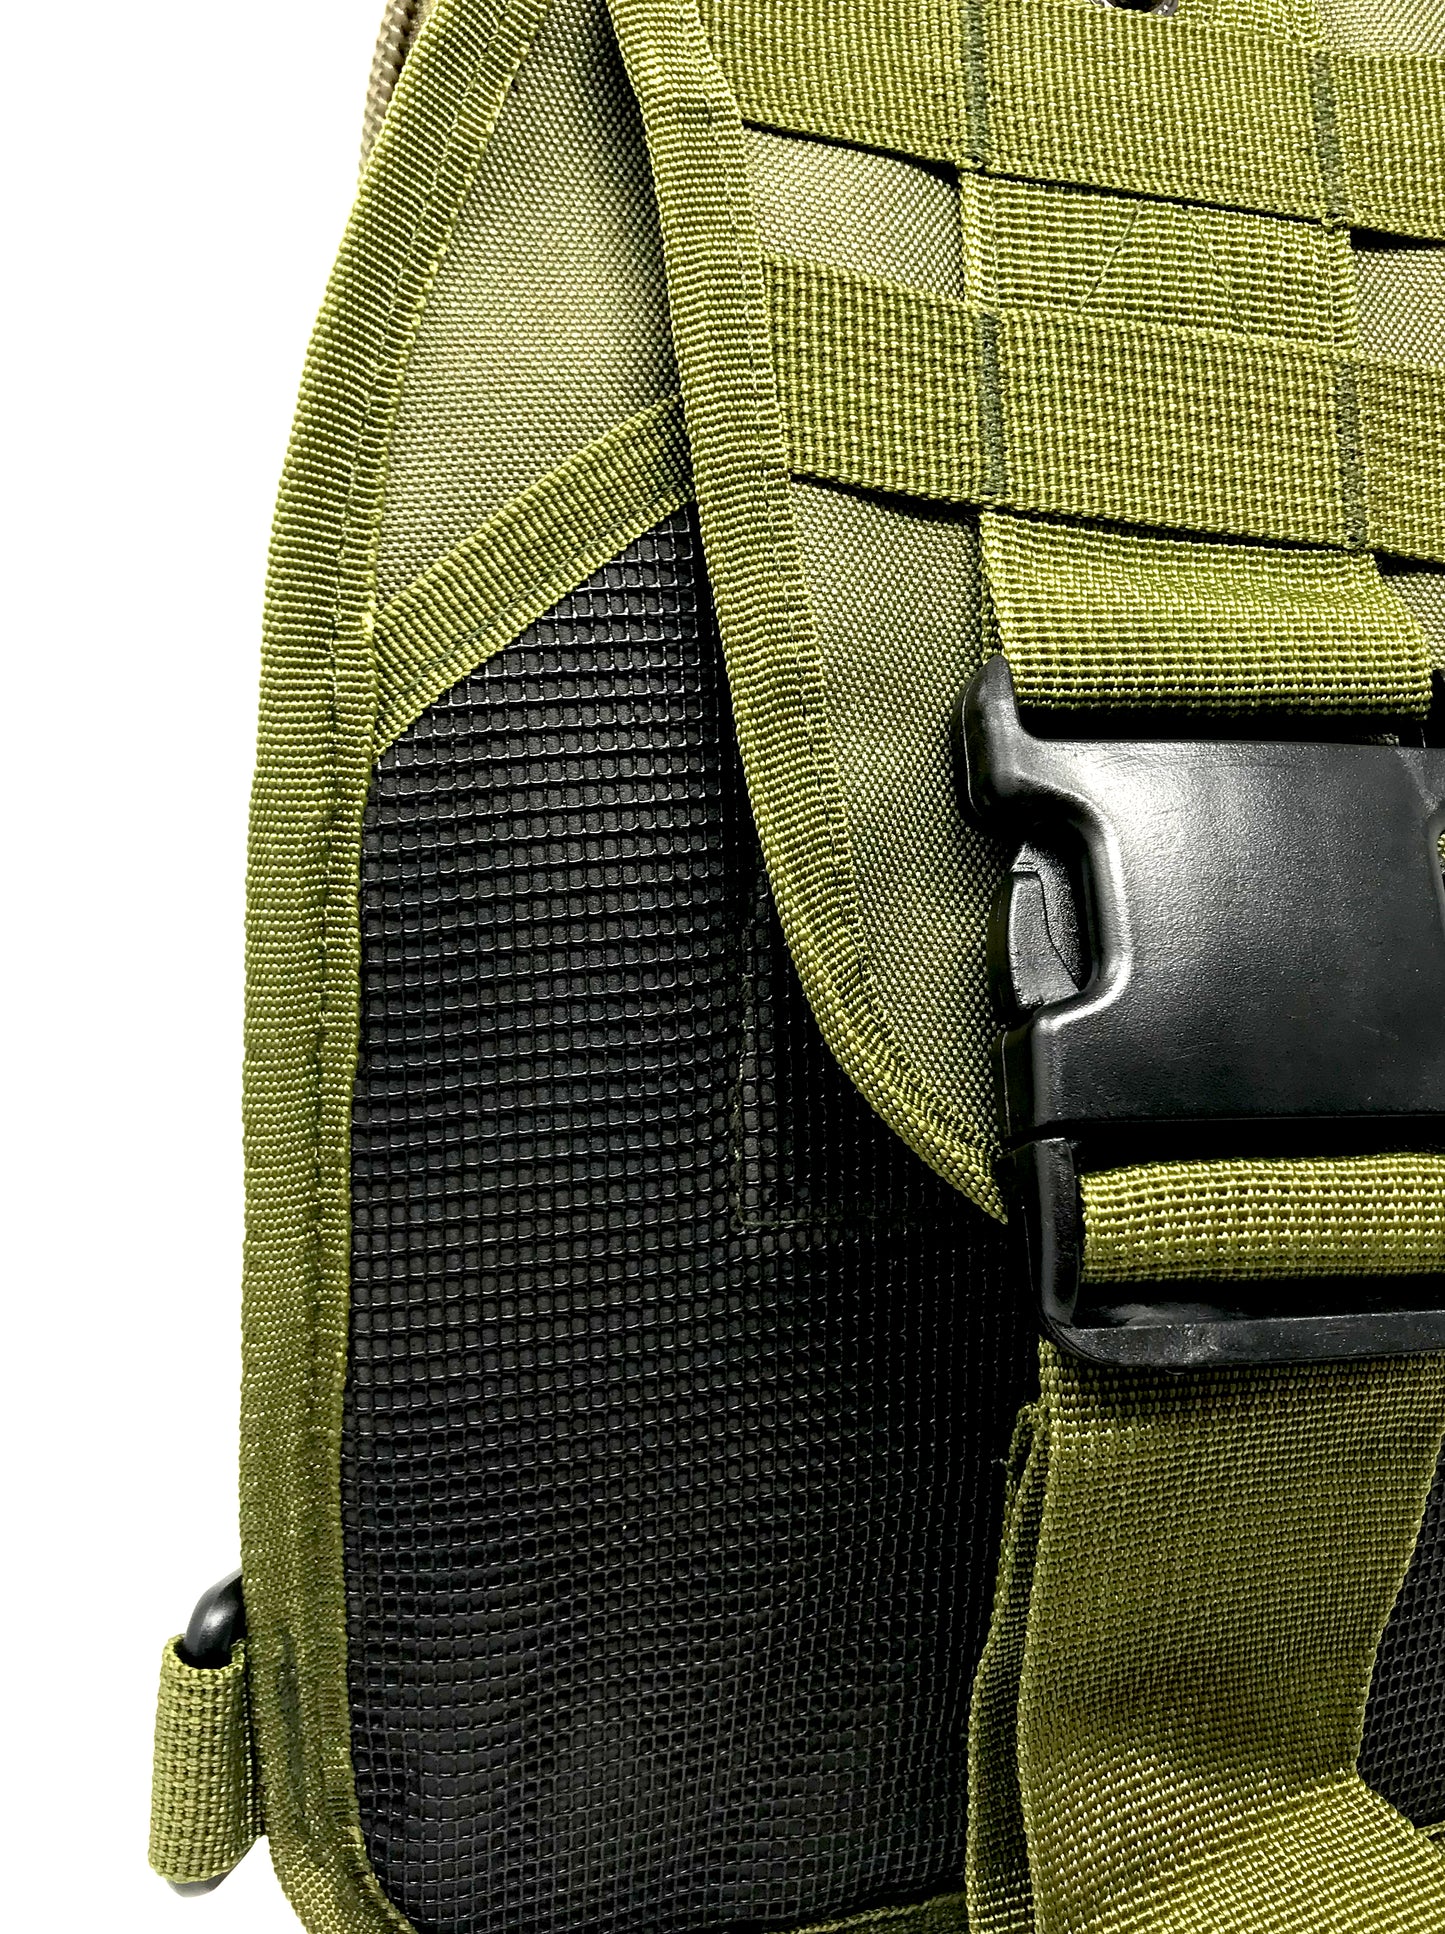 Explore Pack - Olive Green